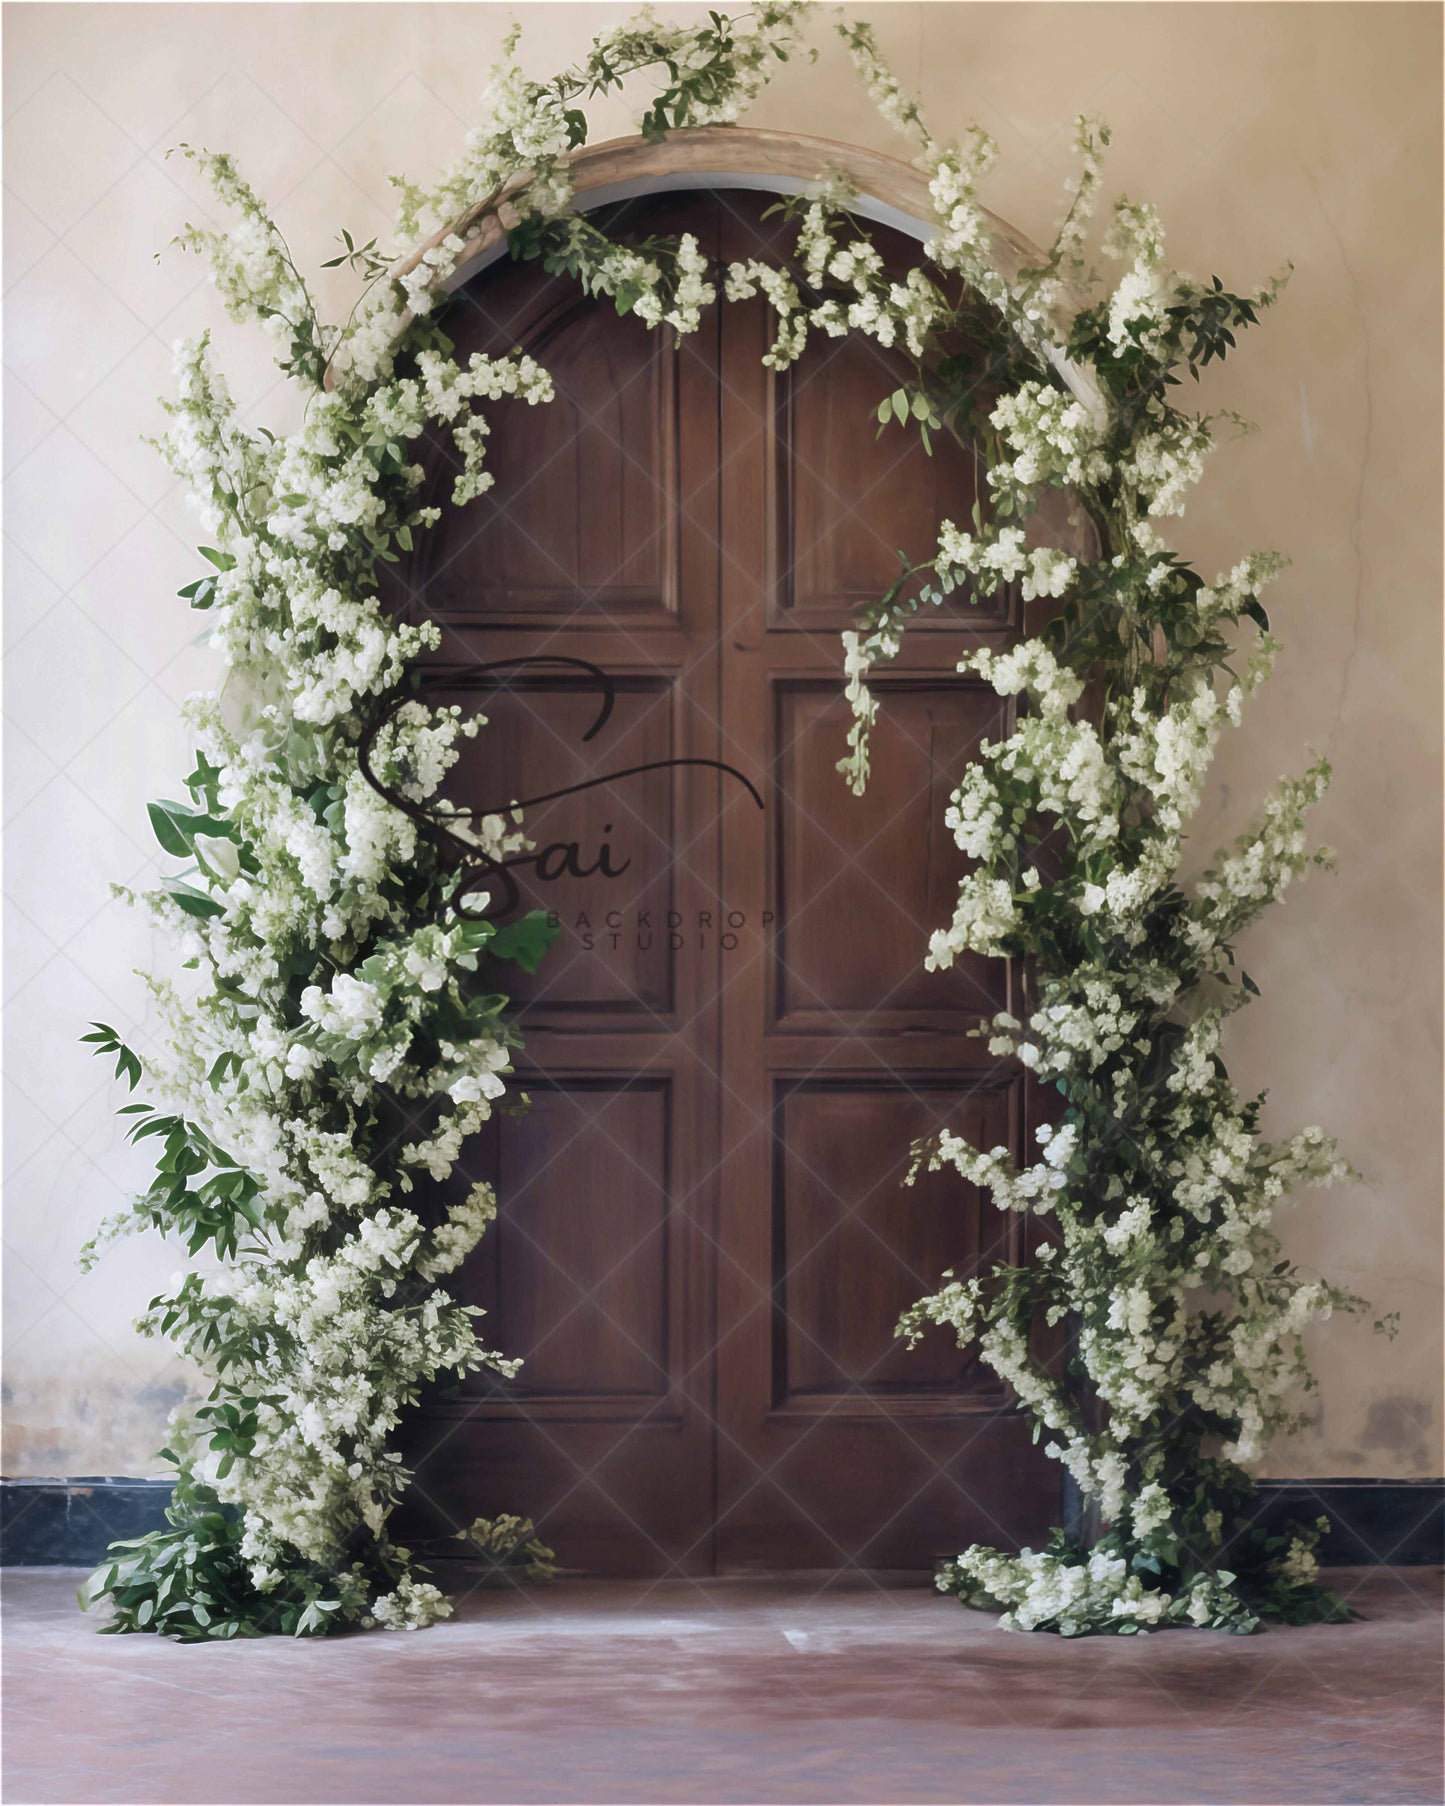 Vintage Door Floral Frame - Digital Backdrop - With Personal and Commercial License for Businesses